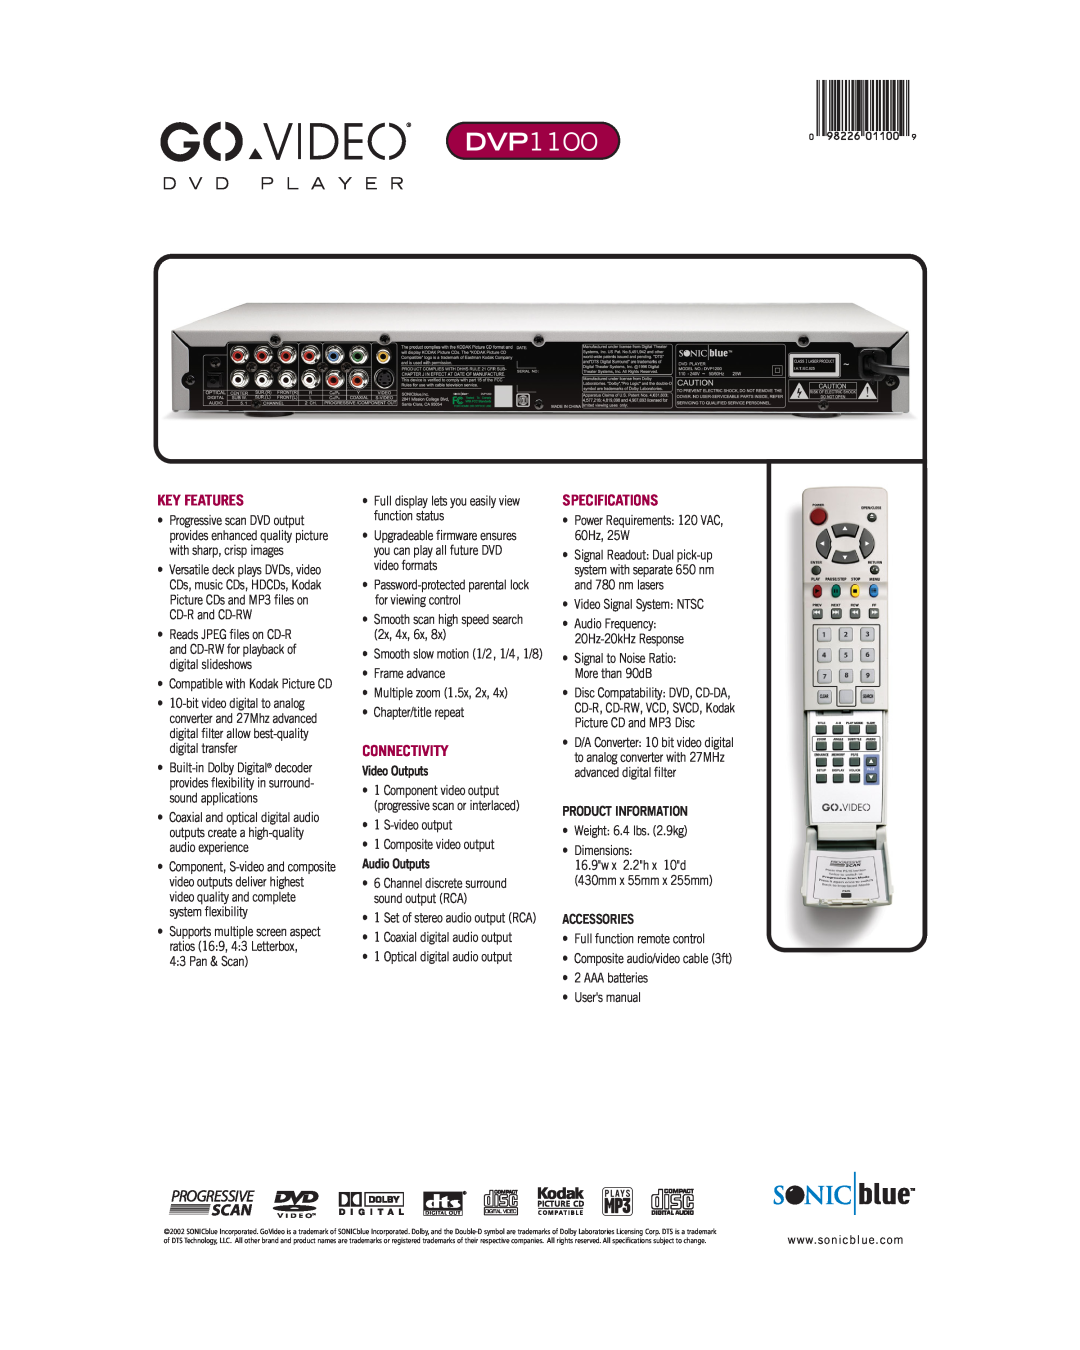 Go-Video DVP1100 Key Features, Connectivity, Specifications, Frame advance Multiple zoom 1.5x, 2x Chapter/title repeat 